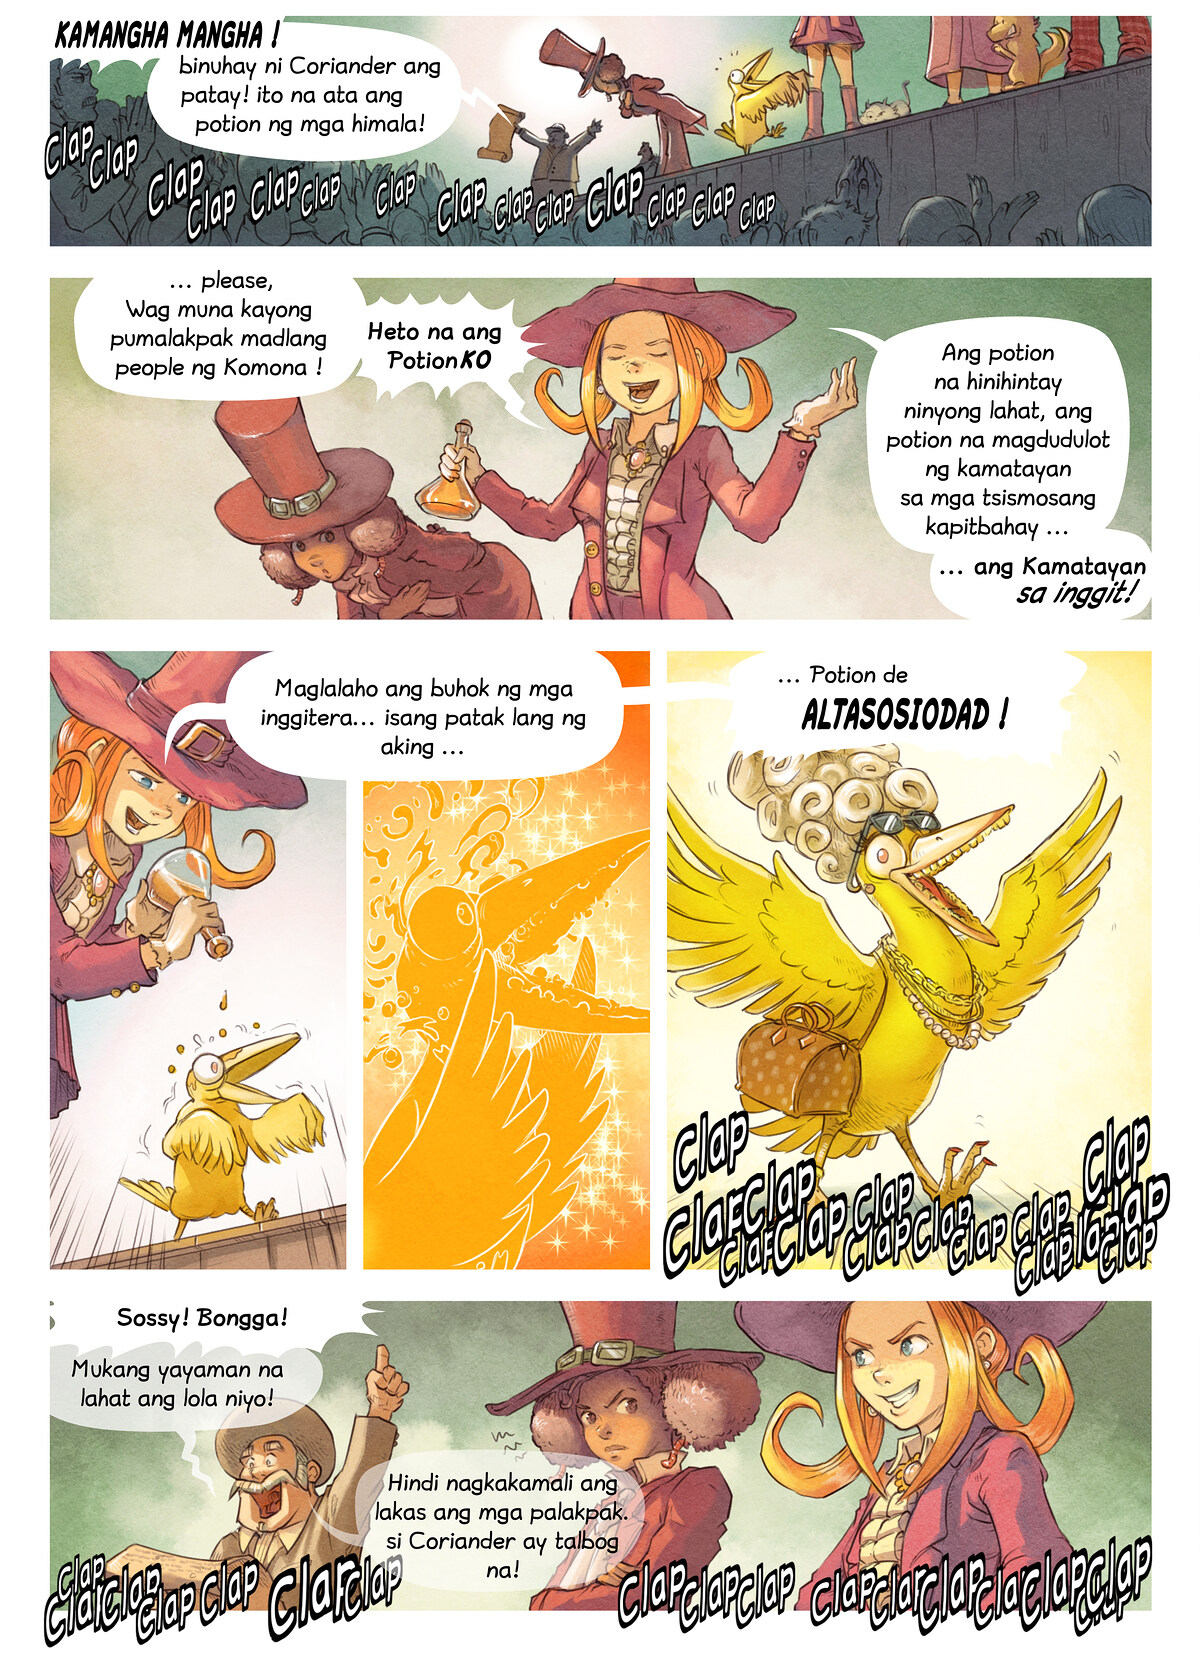 Episode 6: Ang Potions Contest, Page 5